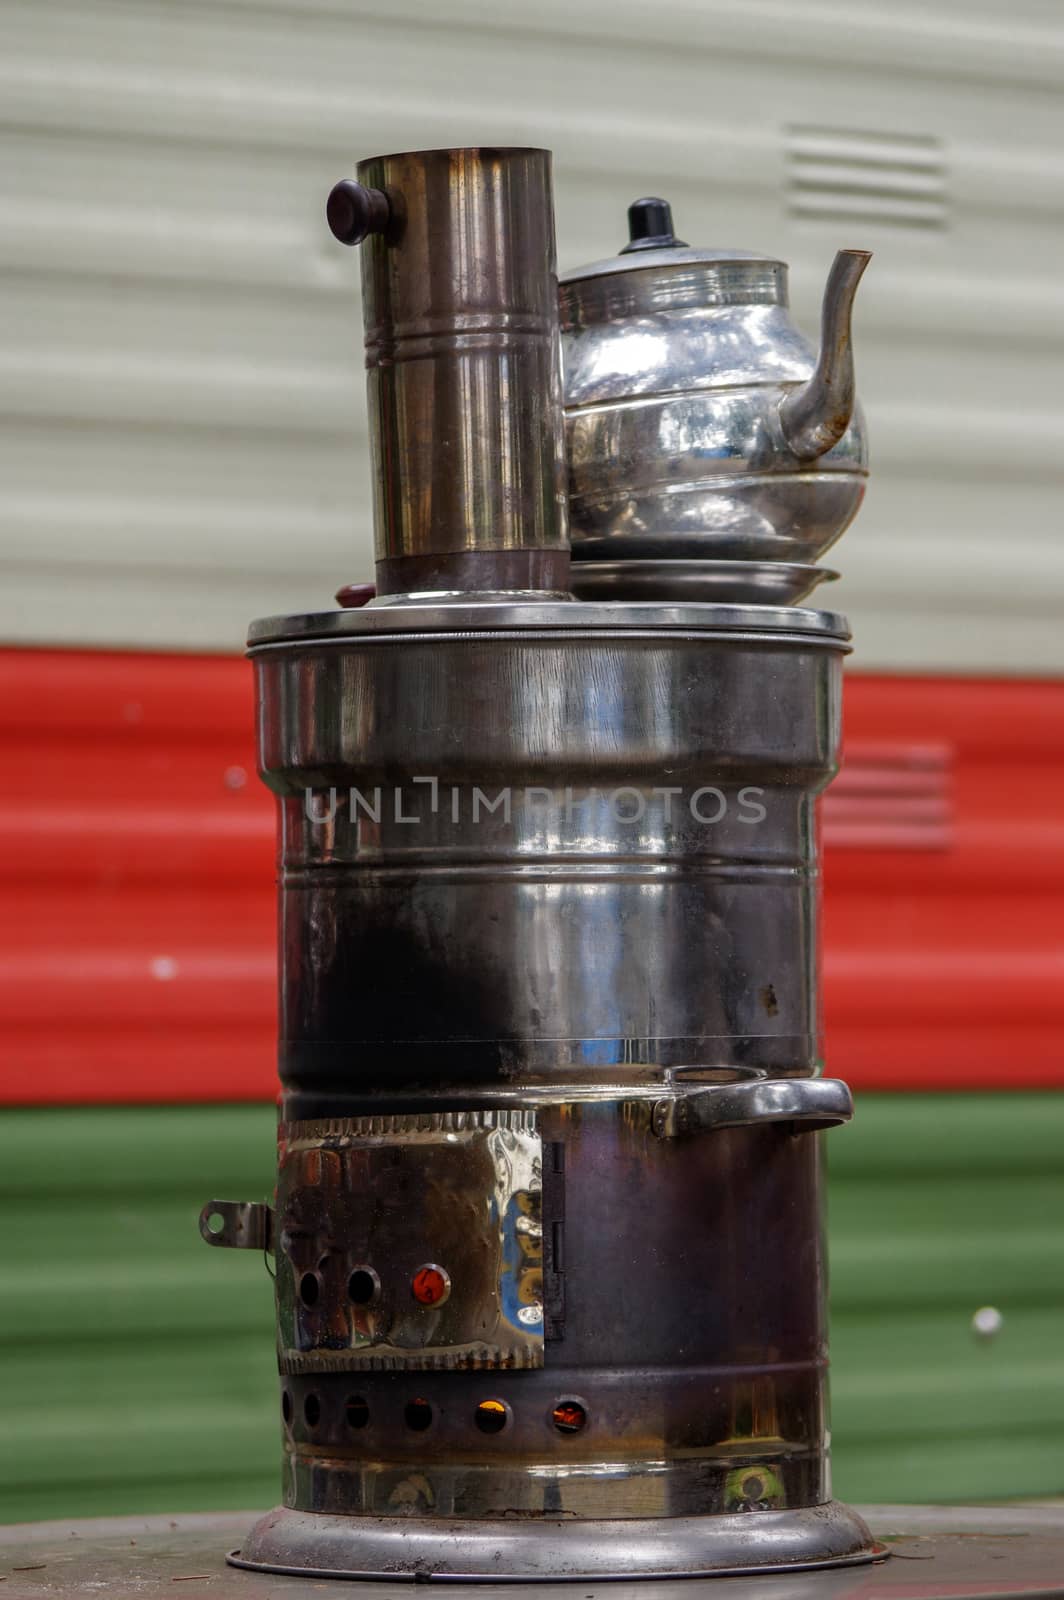 Ancient Russian samovar with open fire. A device for making tea. by evolutionnow